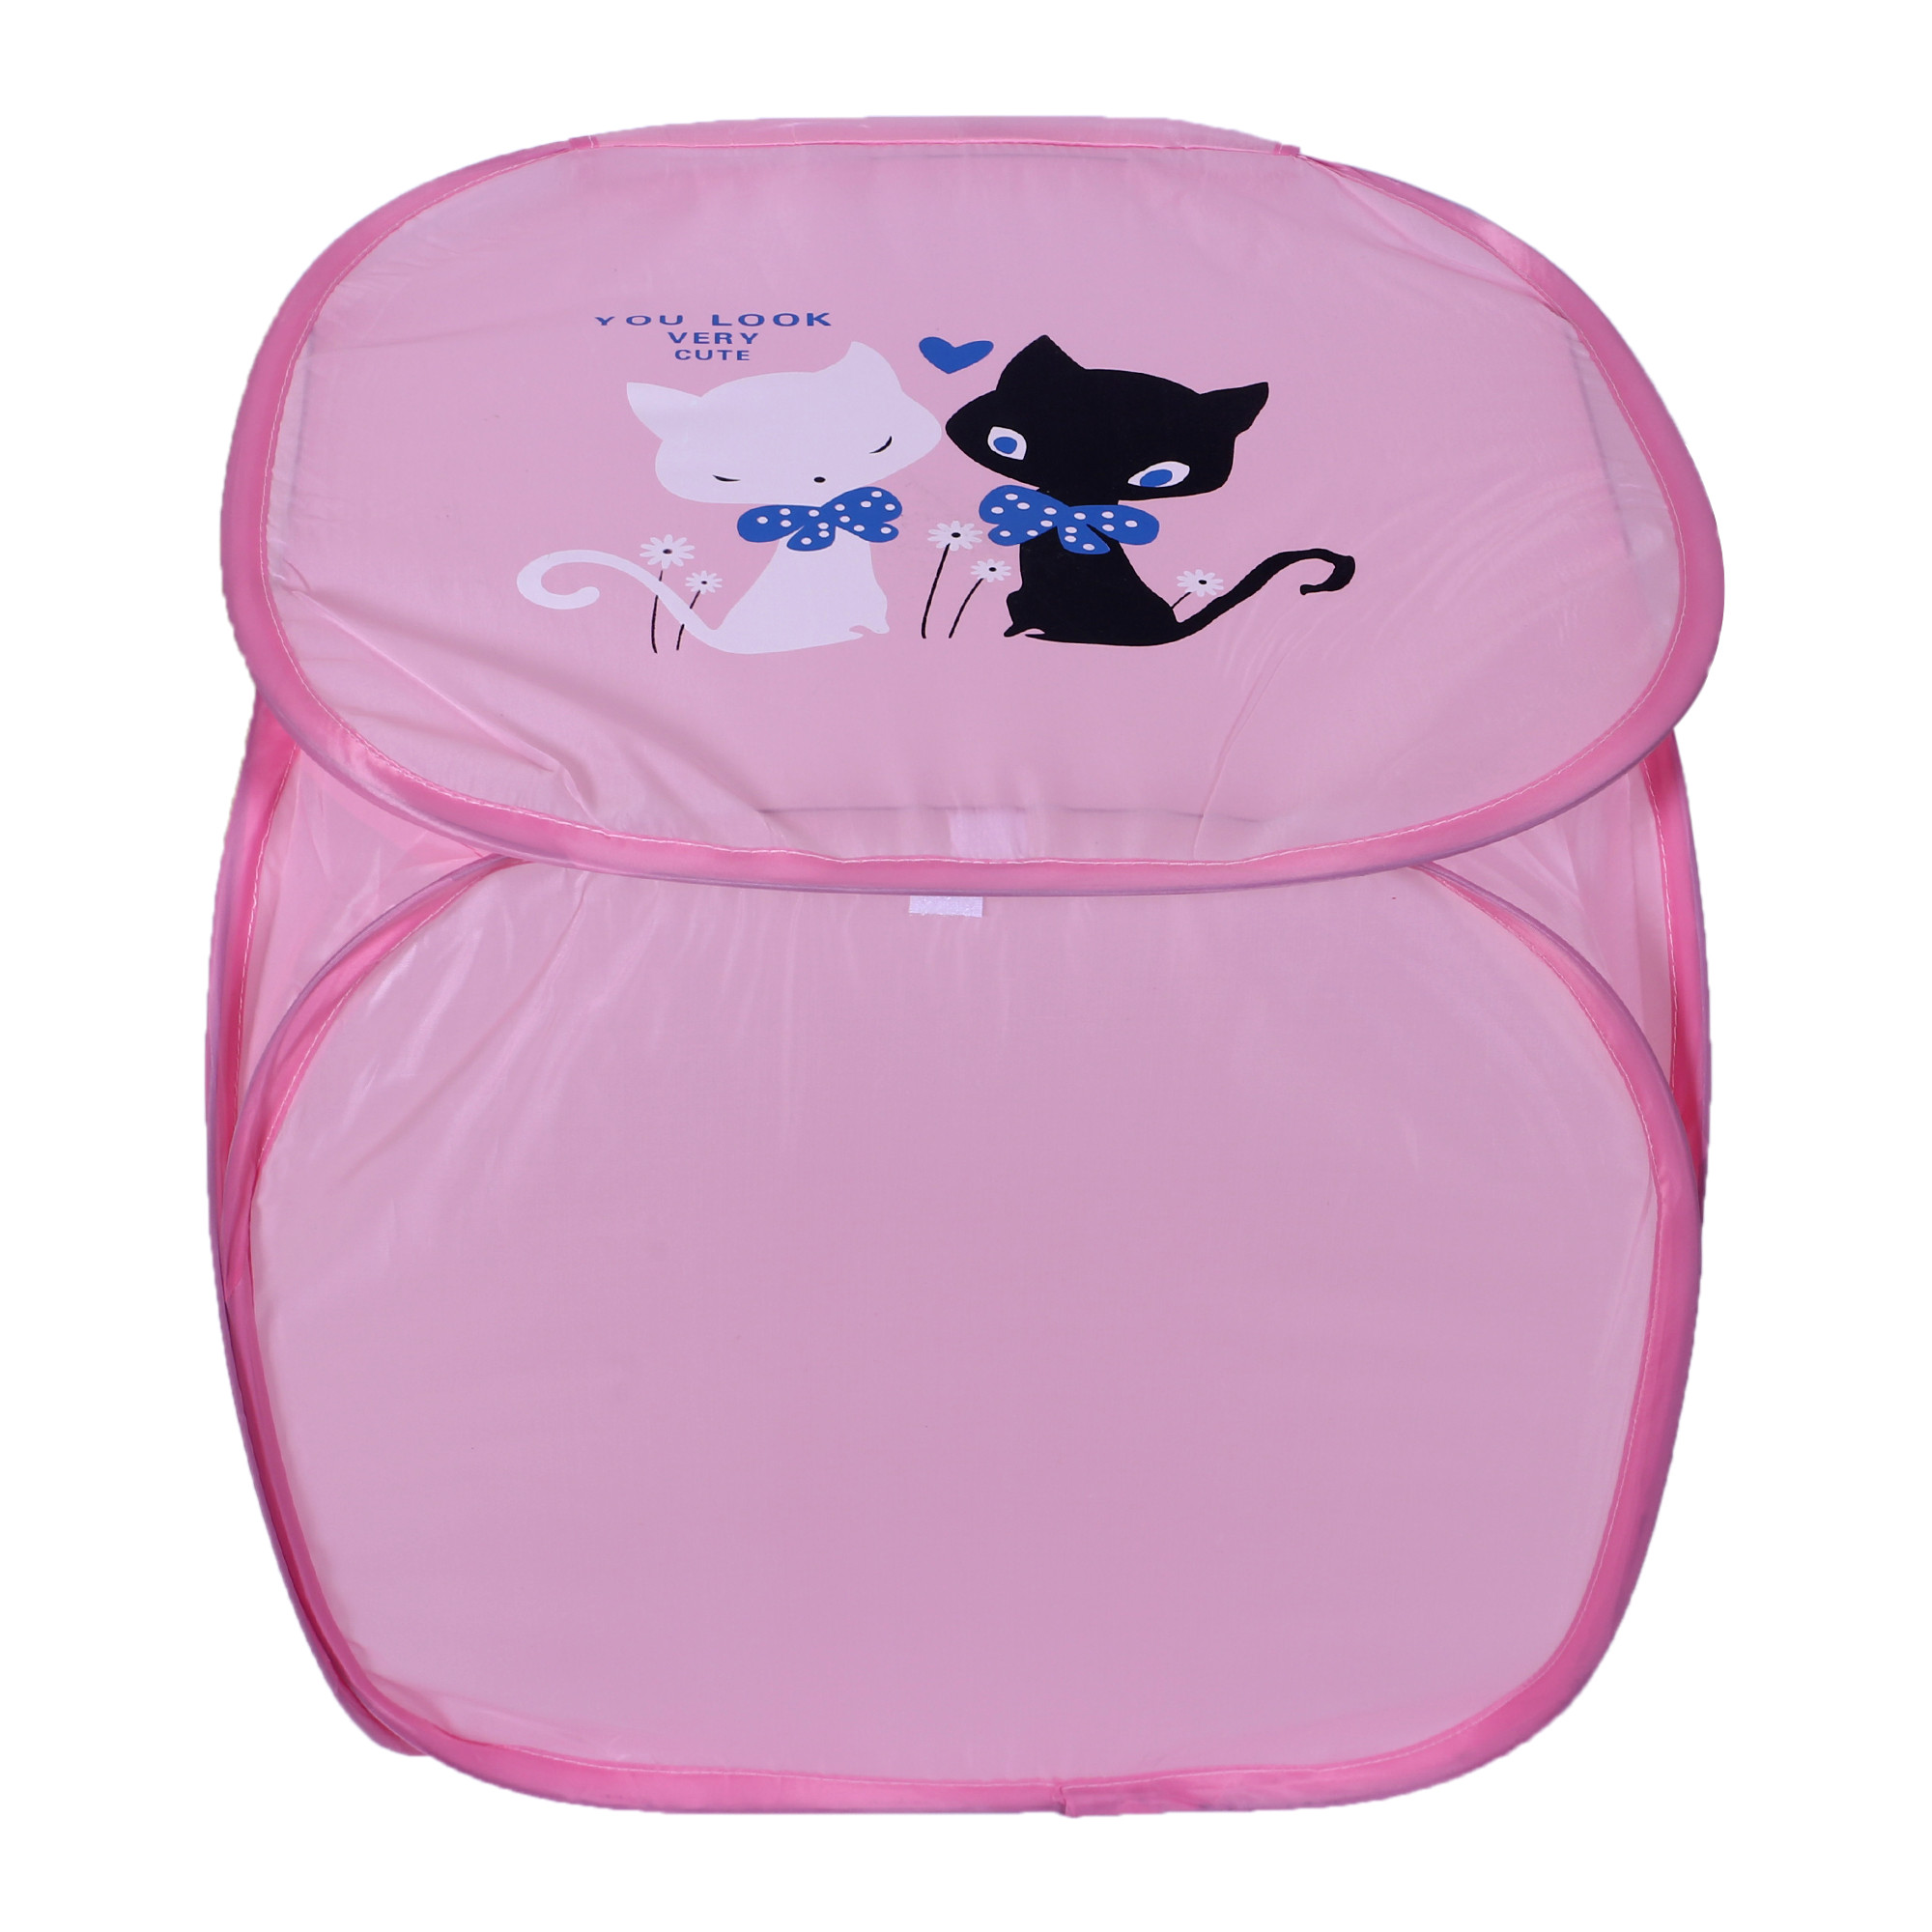 Kuber Industries Polyester Durable & Collapsible Square Laundry Basket|Clothes Storage Box With Lid & Side Handles,45 Ltr.(Pink)